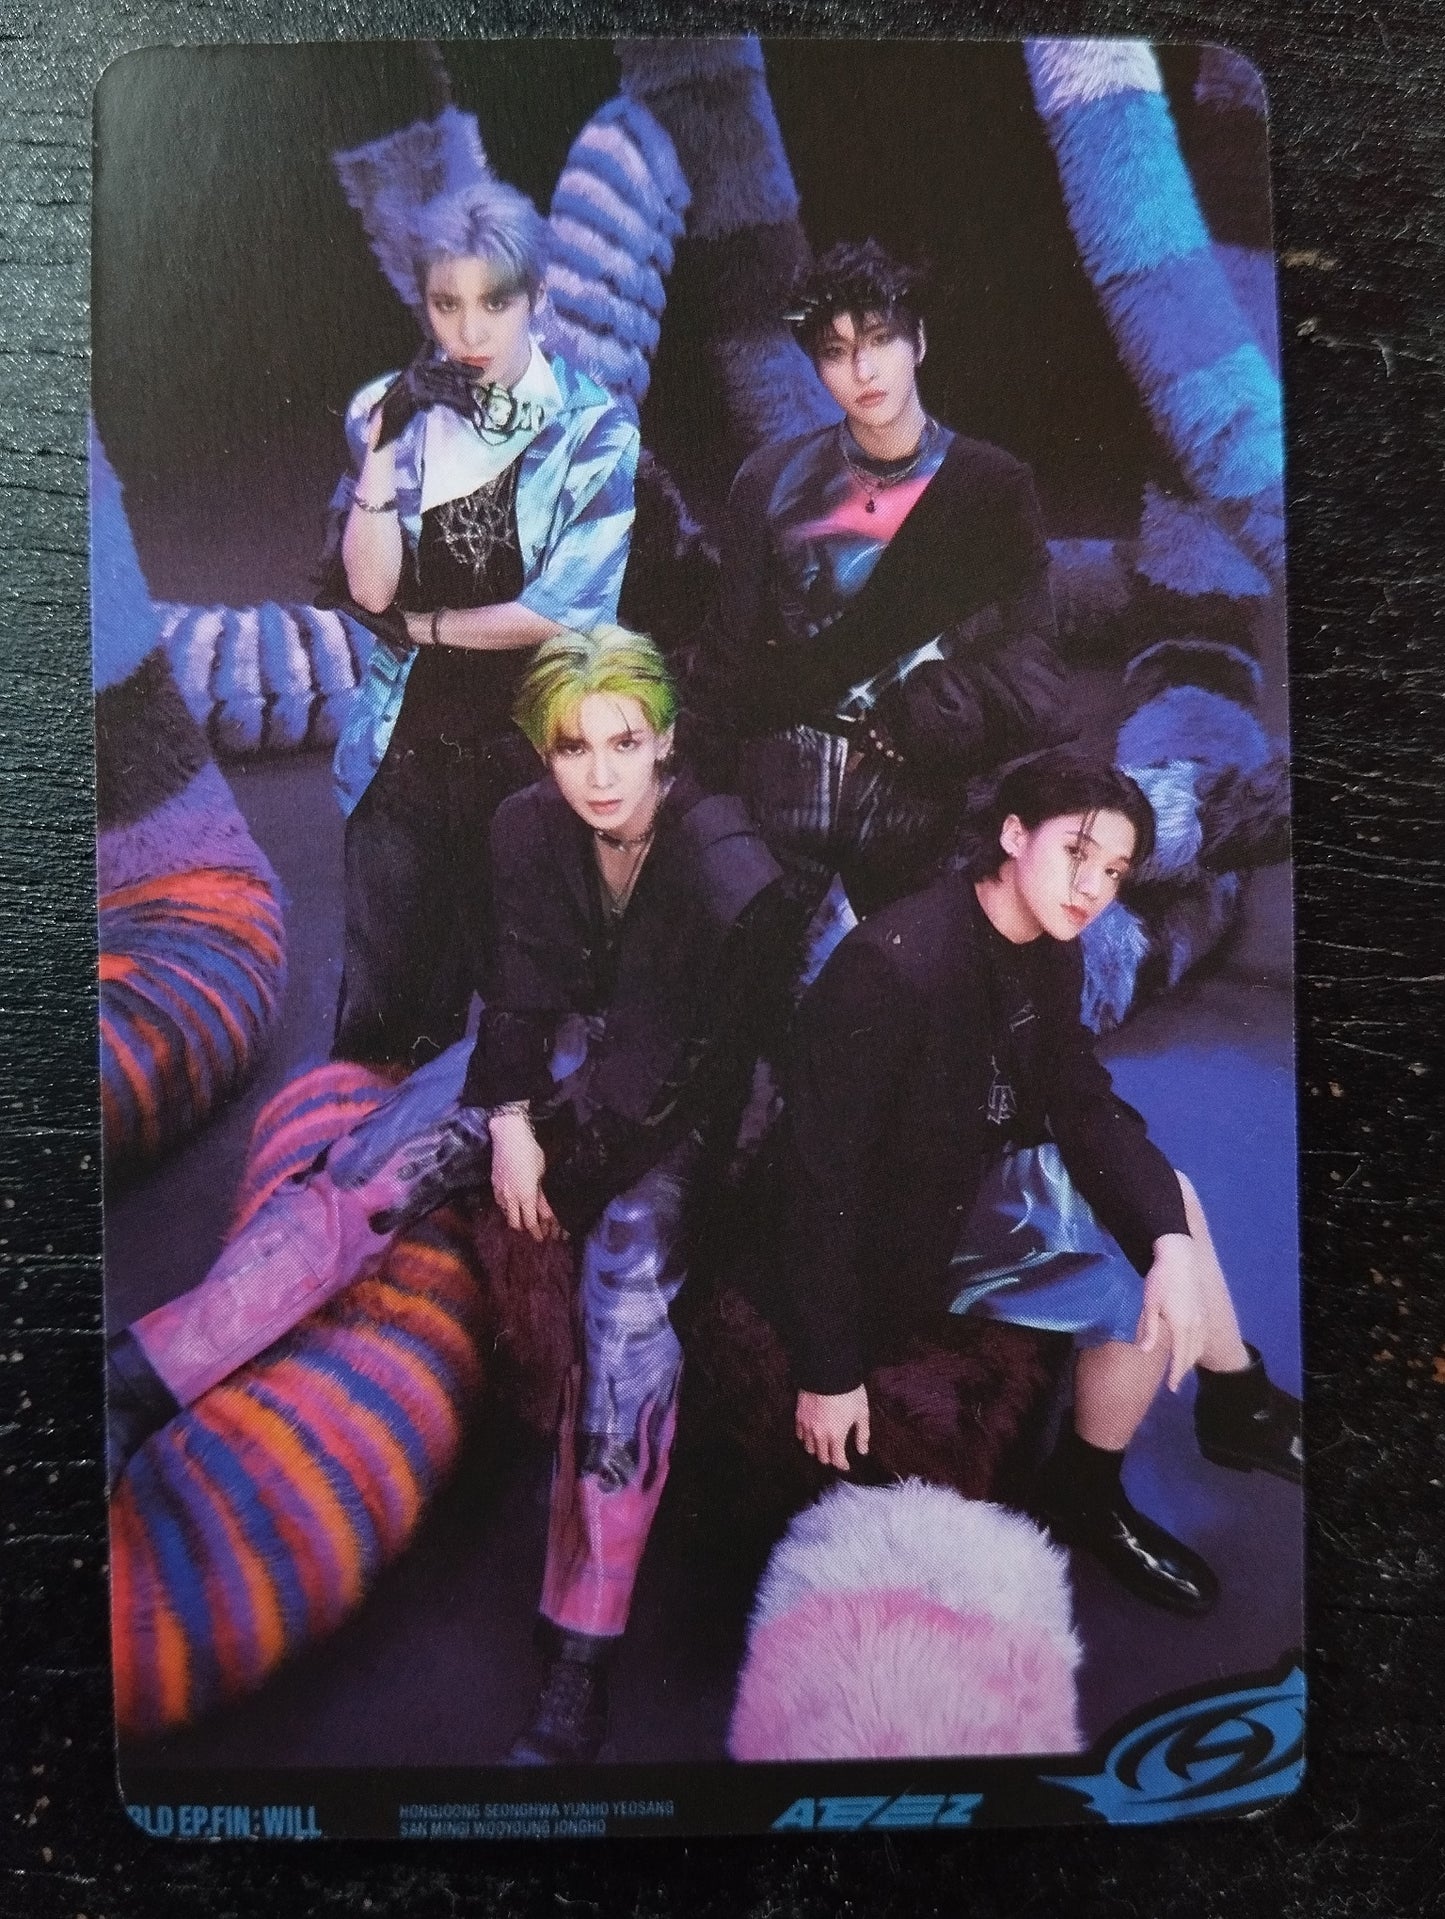 Photocard  ATEEZ The world Ep. fin : will Yunho Seonghwa Wooyoung Yeosang